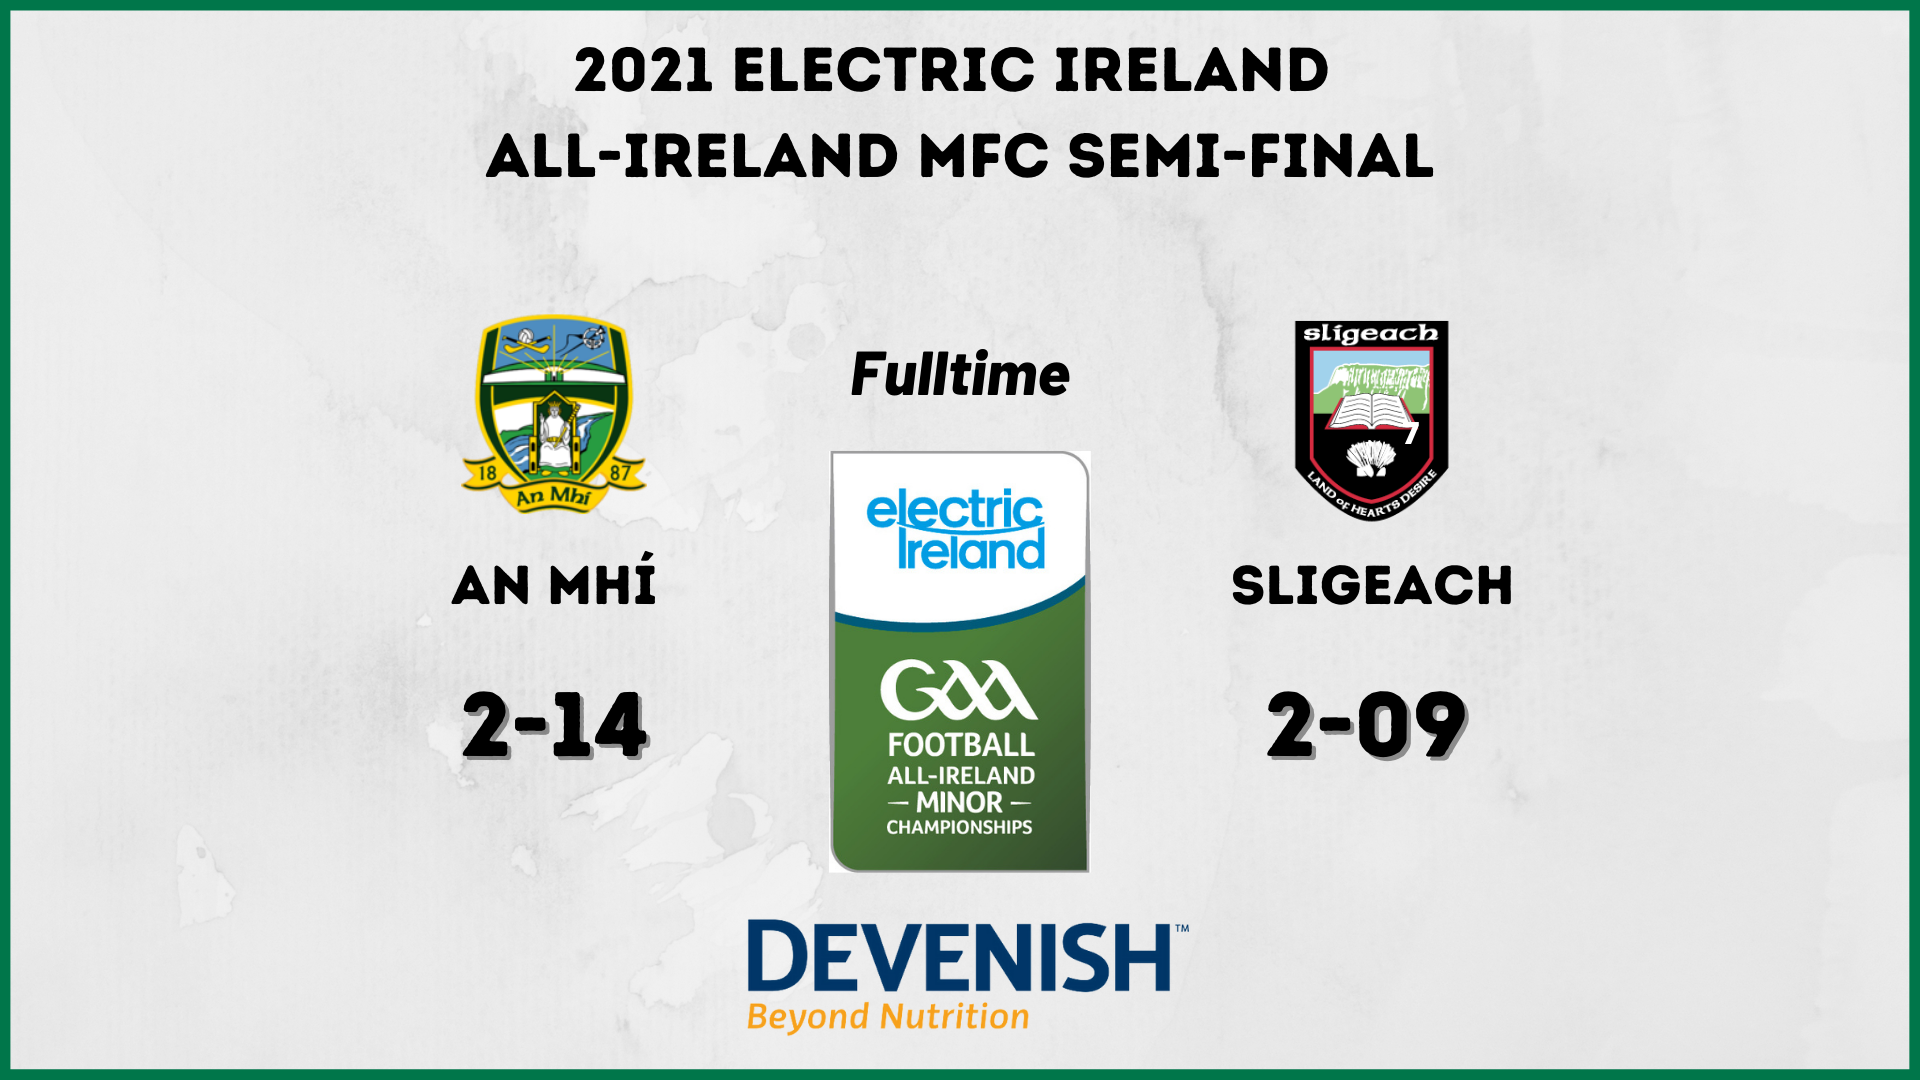 Meath Minors into the All-Ireland Final!!!